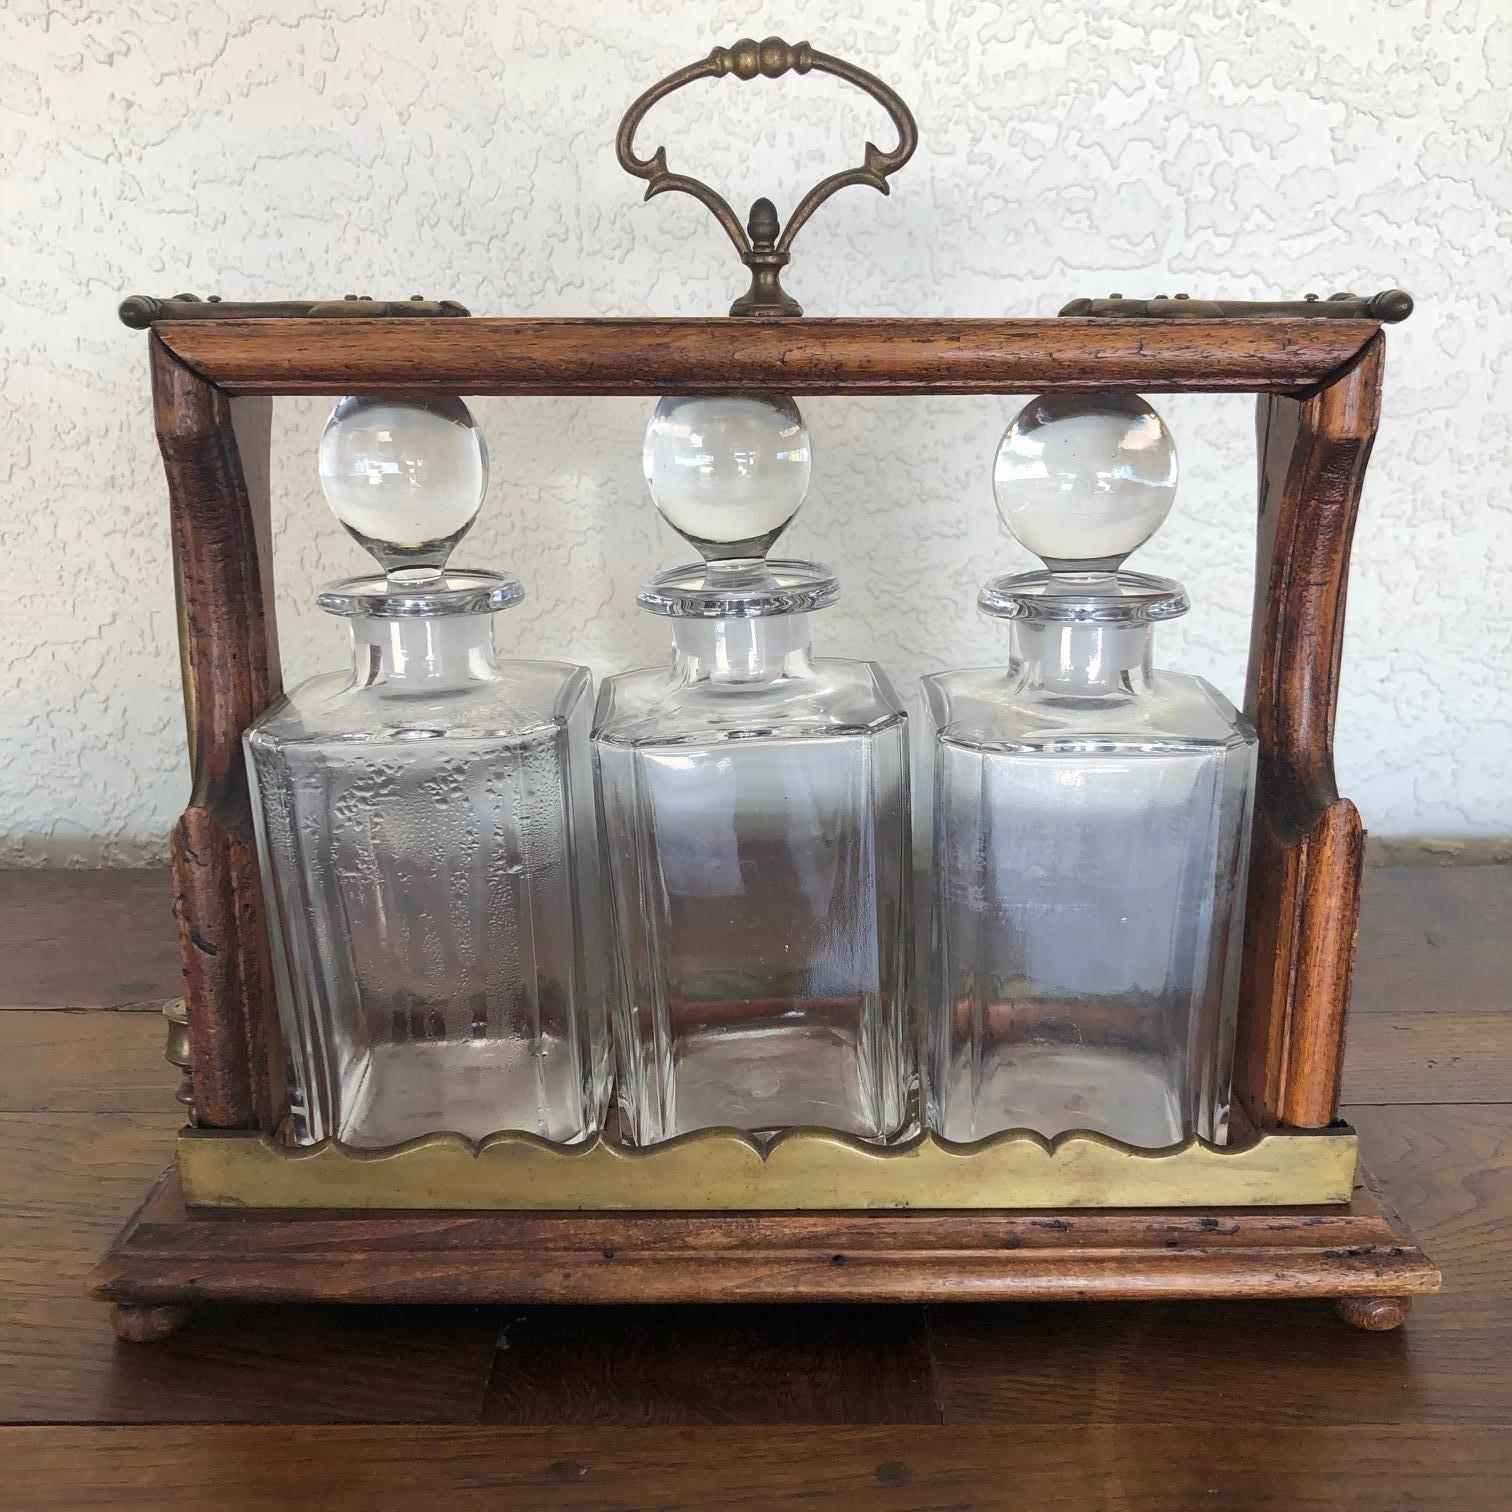 A very special three bottle crystal decanter tantalus executed with brass mounts on an oak platform. The latch mechanism functions as intended, and it has its original unusual cylinder brass lock and key. Another unusual feature of this tantalus is